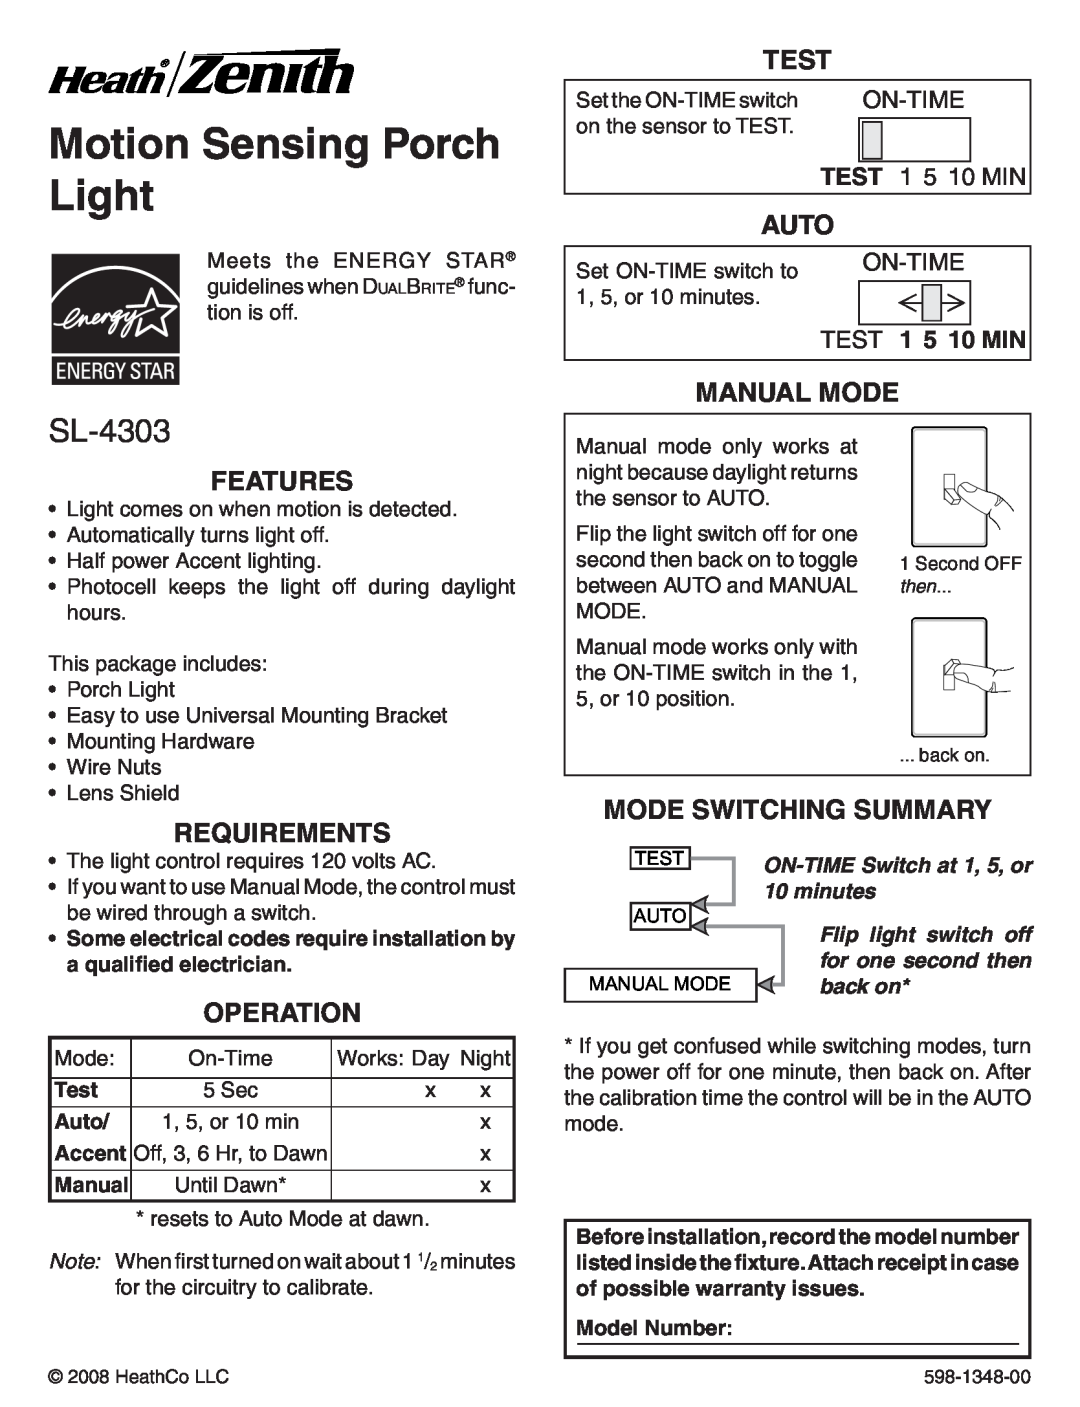 Heath Zenith SL-4303 warranty Motion Sensing Porch Light, Test, Auto, Manual Mode, Features, Requirements, Operation 